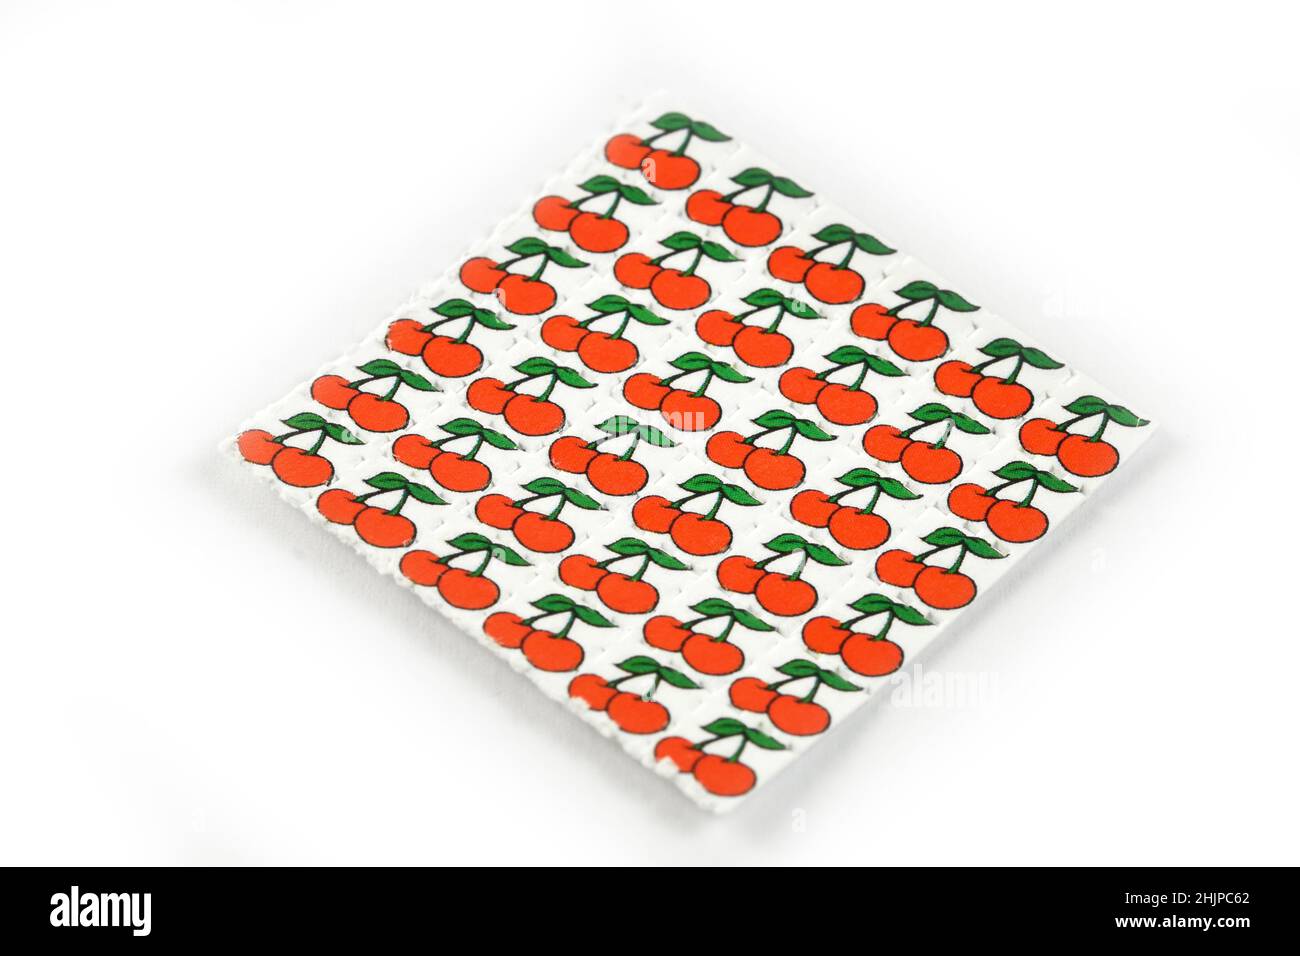 Cherries acid trips, Blotting paper impregnated with the drug L.S.D.- Lysergic acid diethylamide. Stock Photo